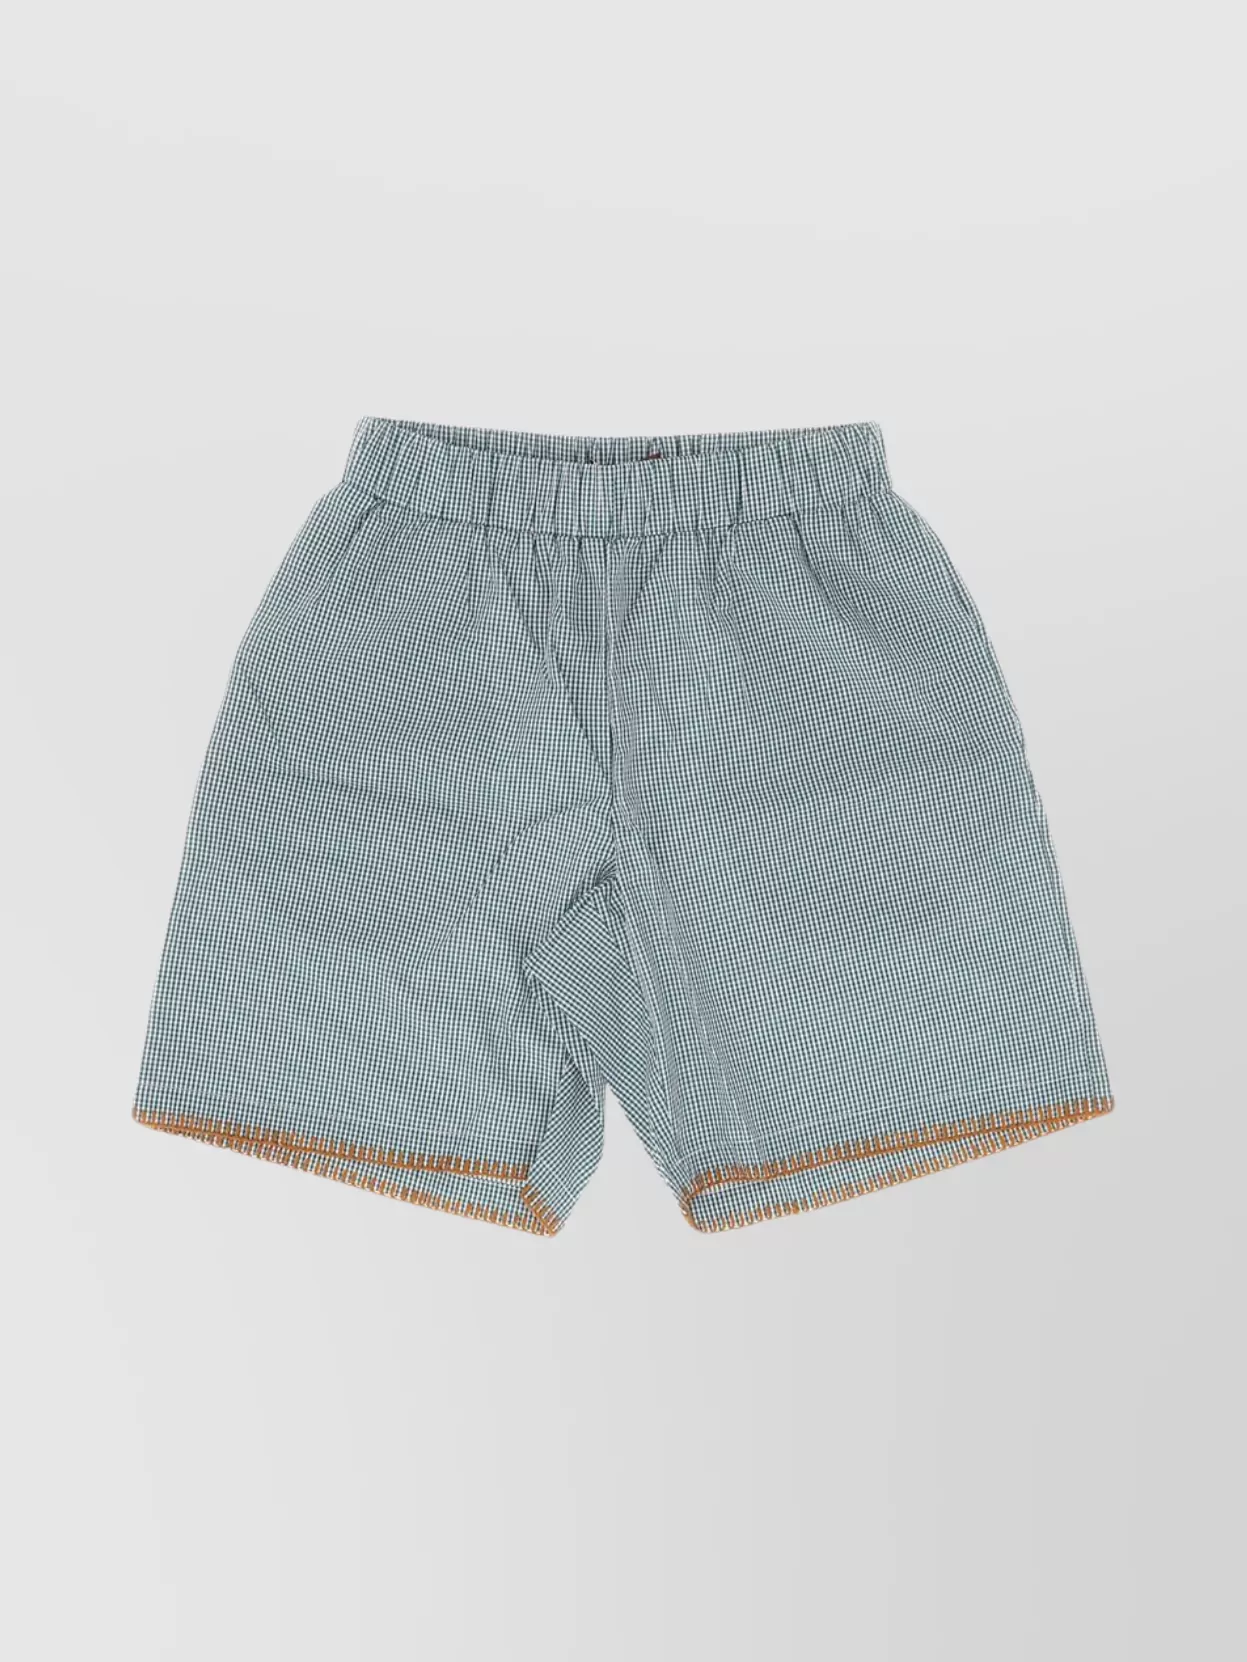 Chateau Orlando Gingham Checked Cotton Shorts In Blue